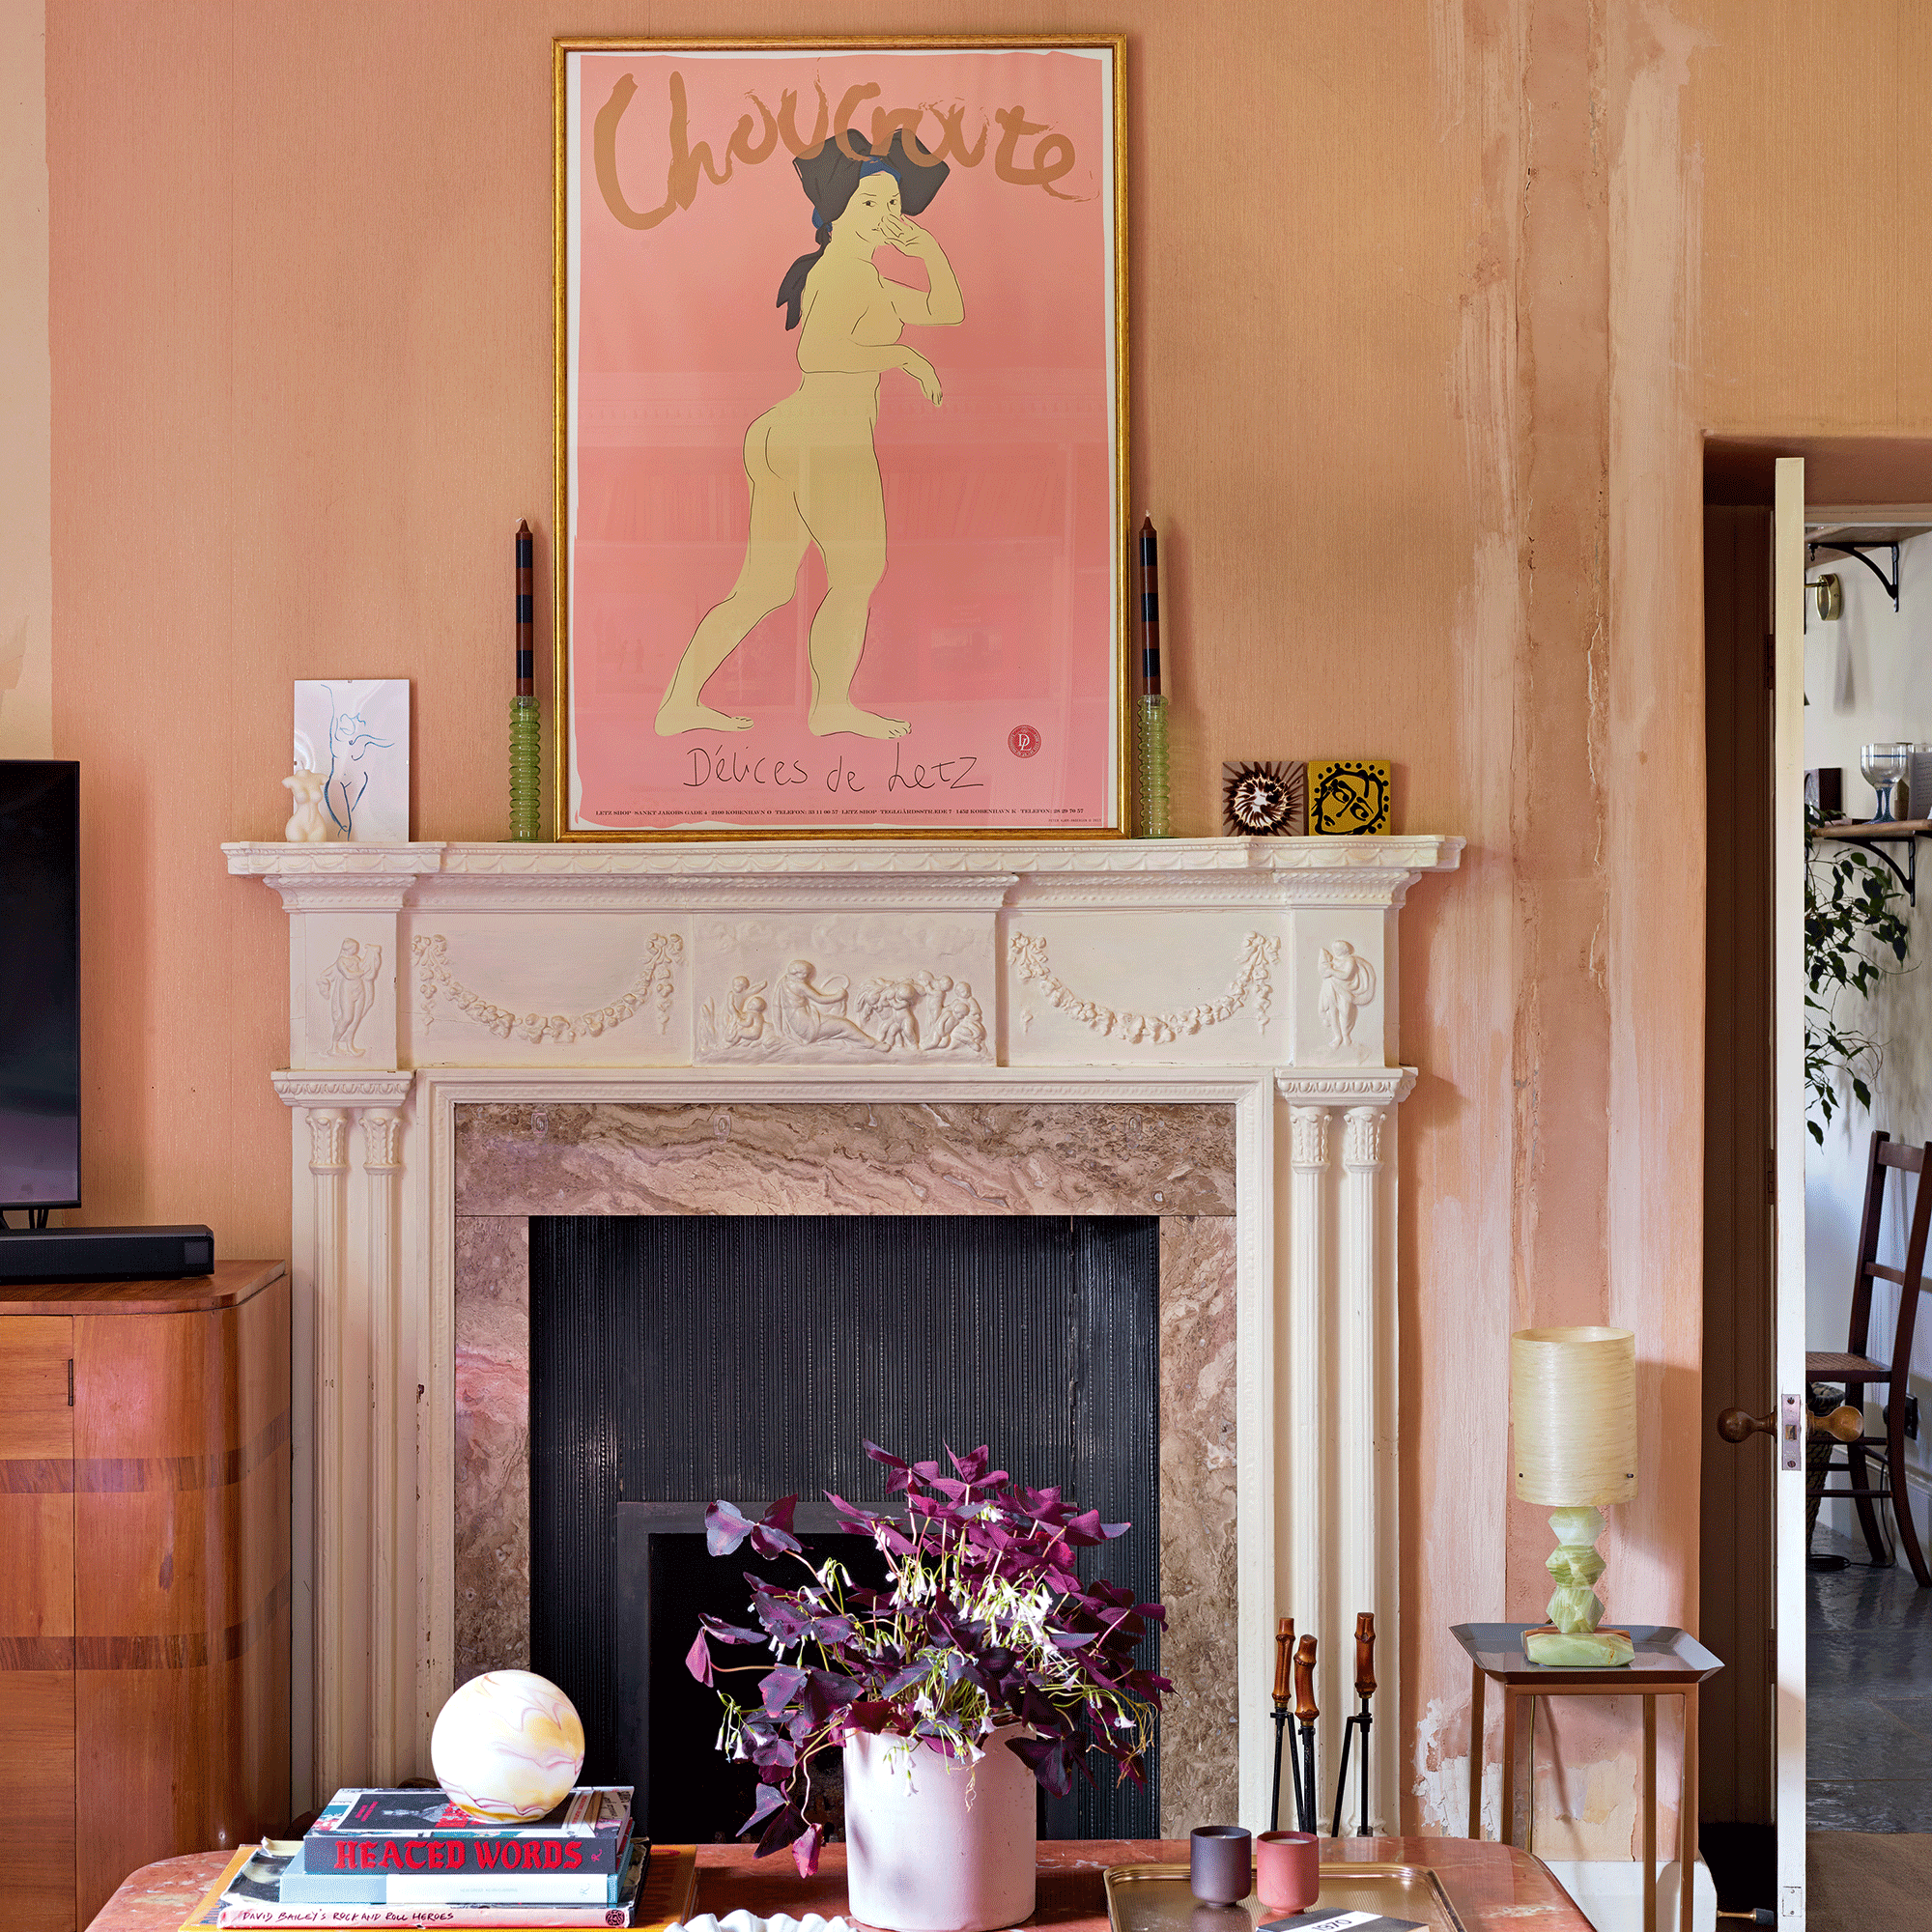 Large picture over a fireplace in pink room